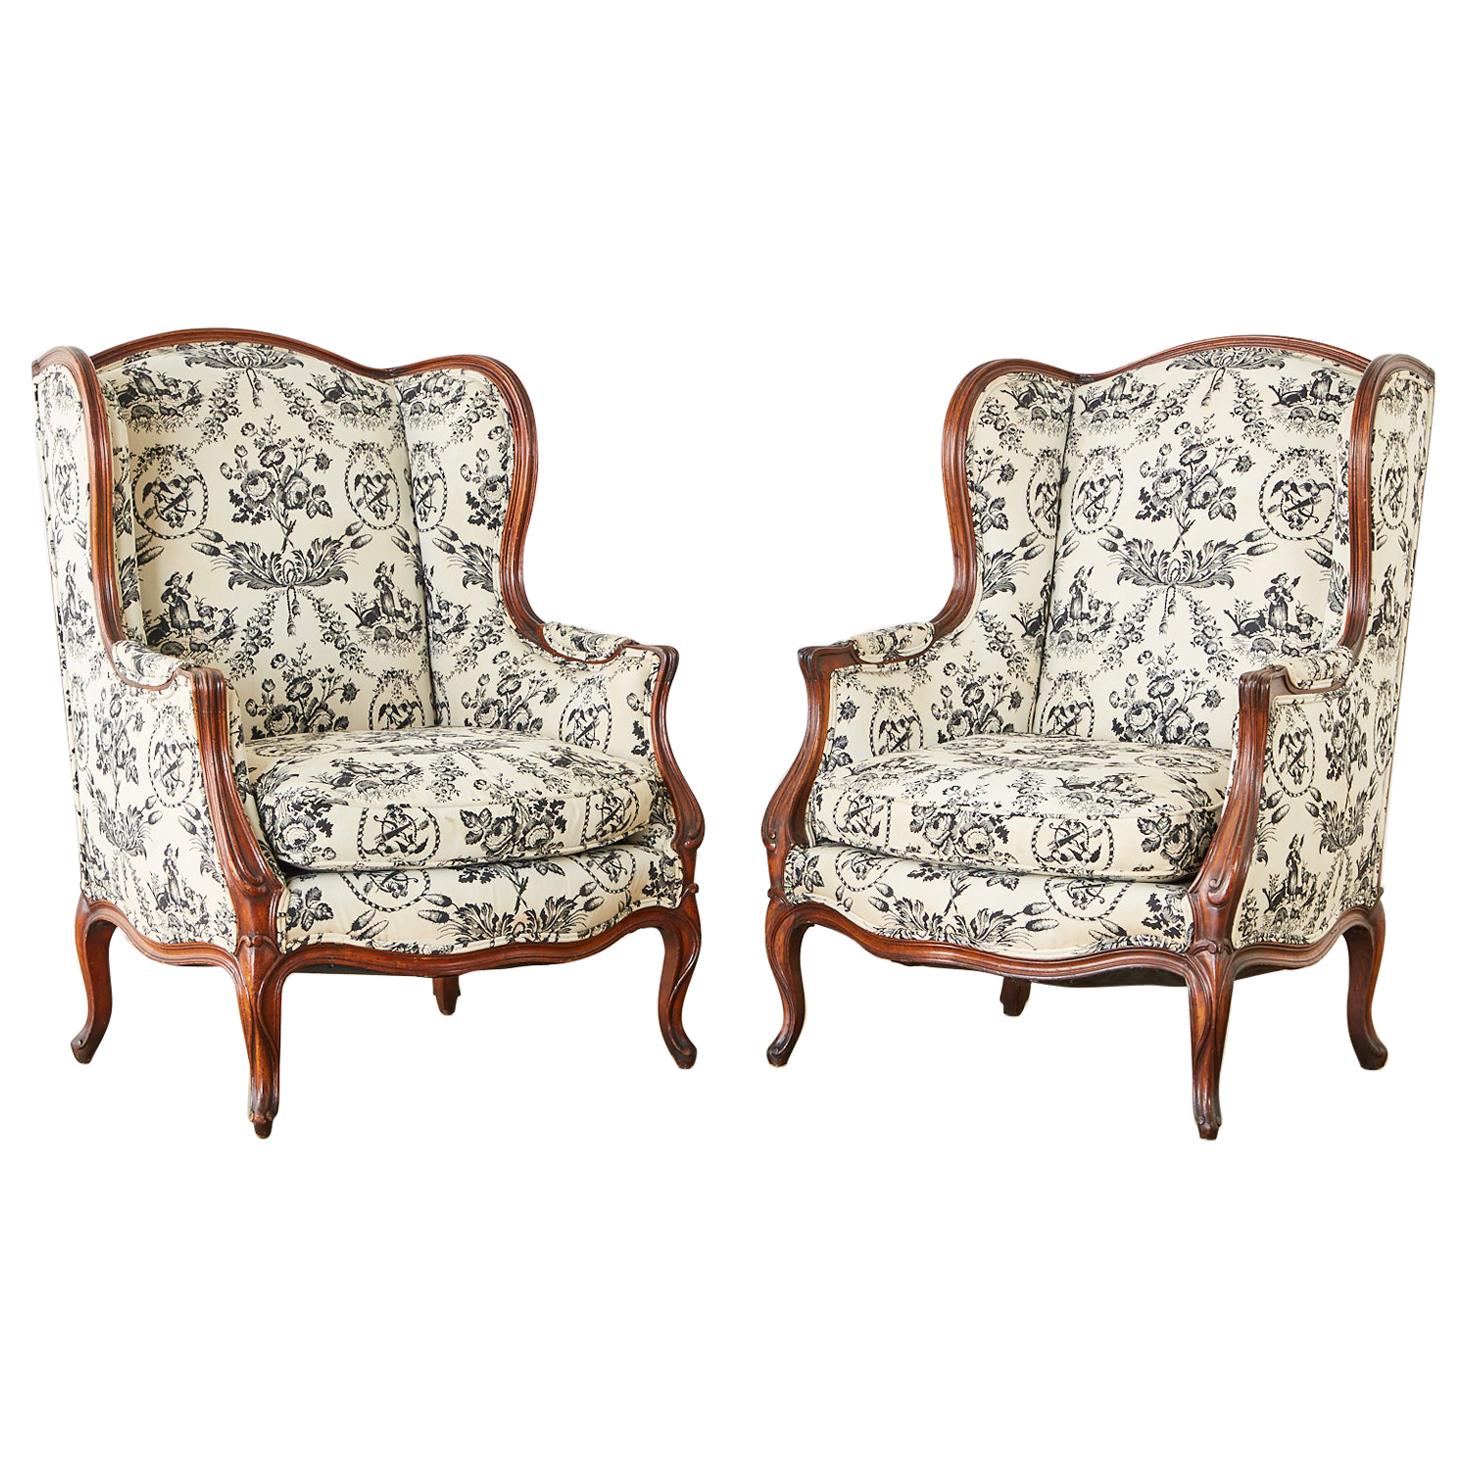 Pair of French Louis XV Style Toile Wingback Chairs